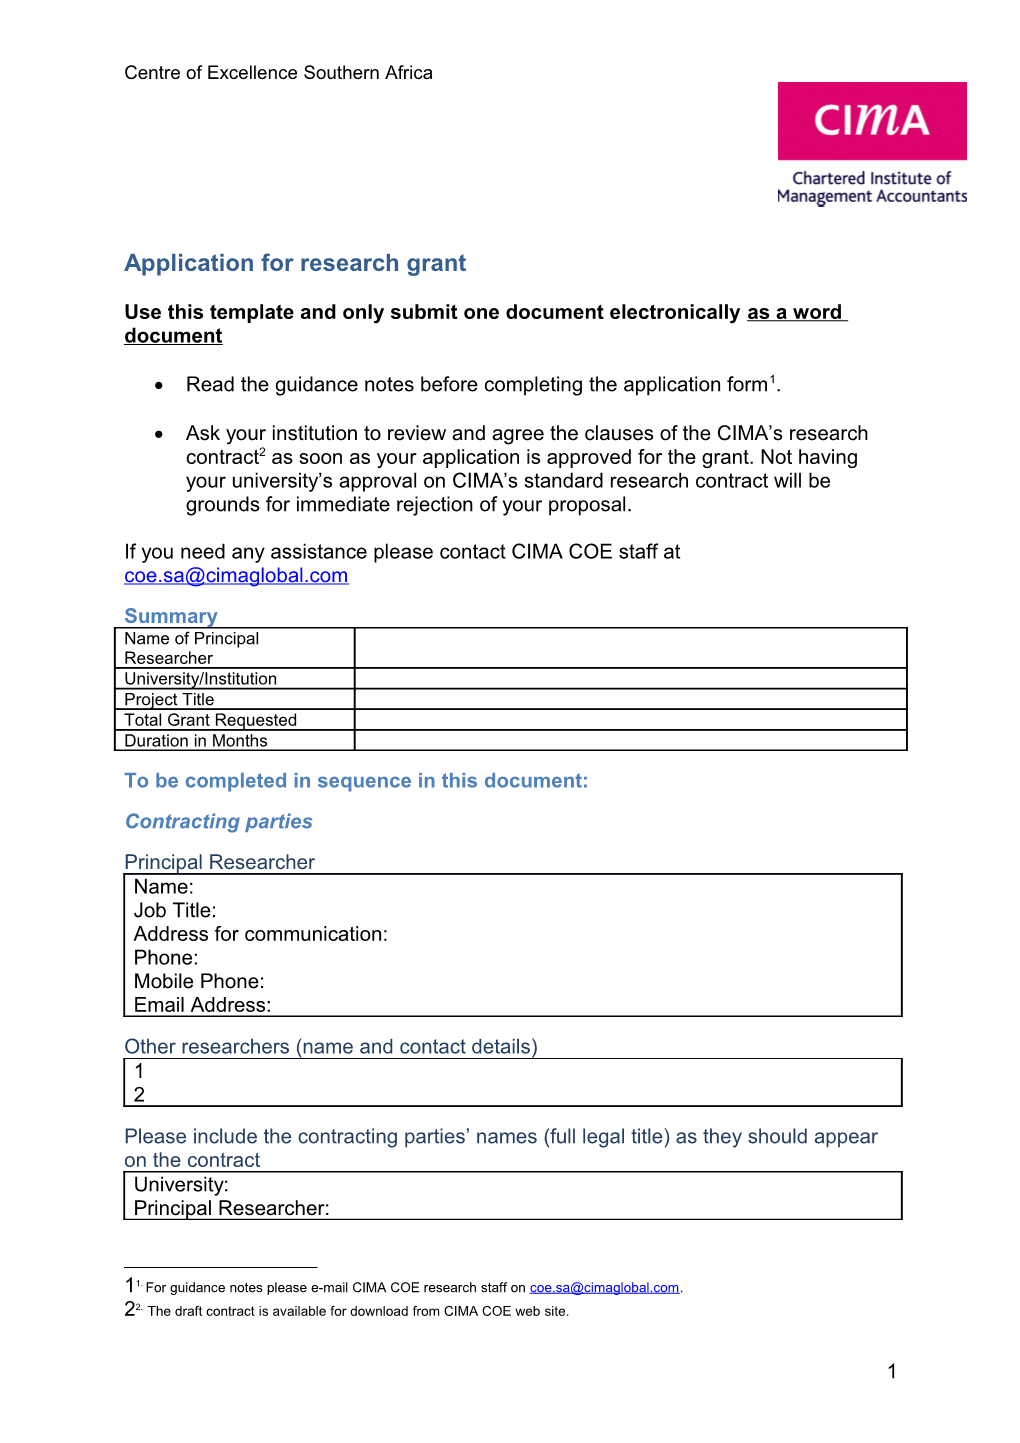 Application for Research Grant s1